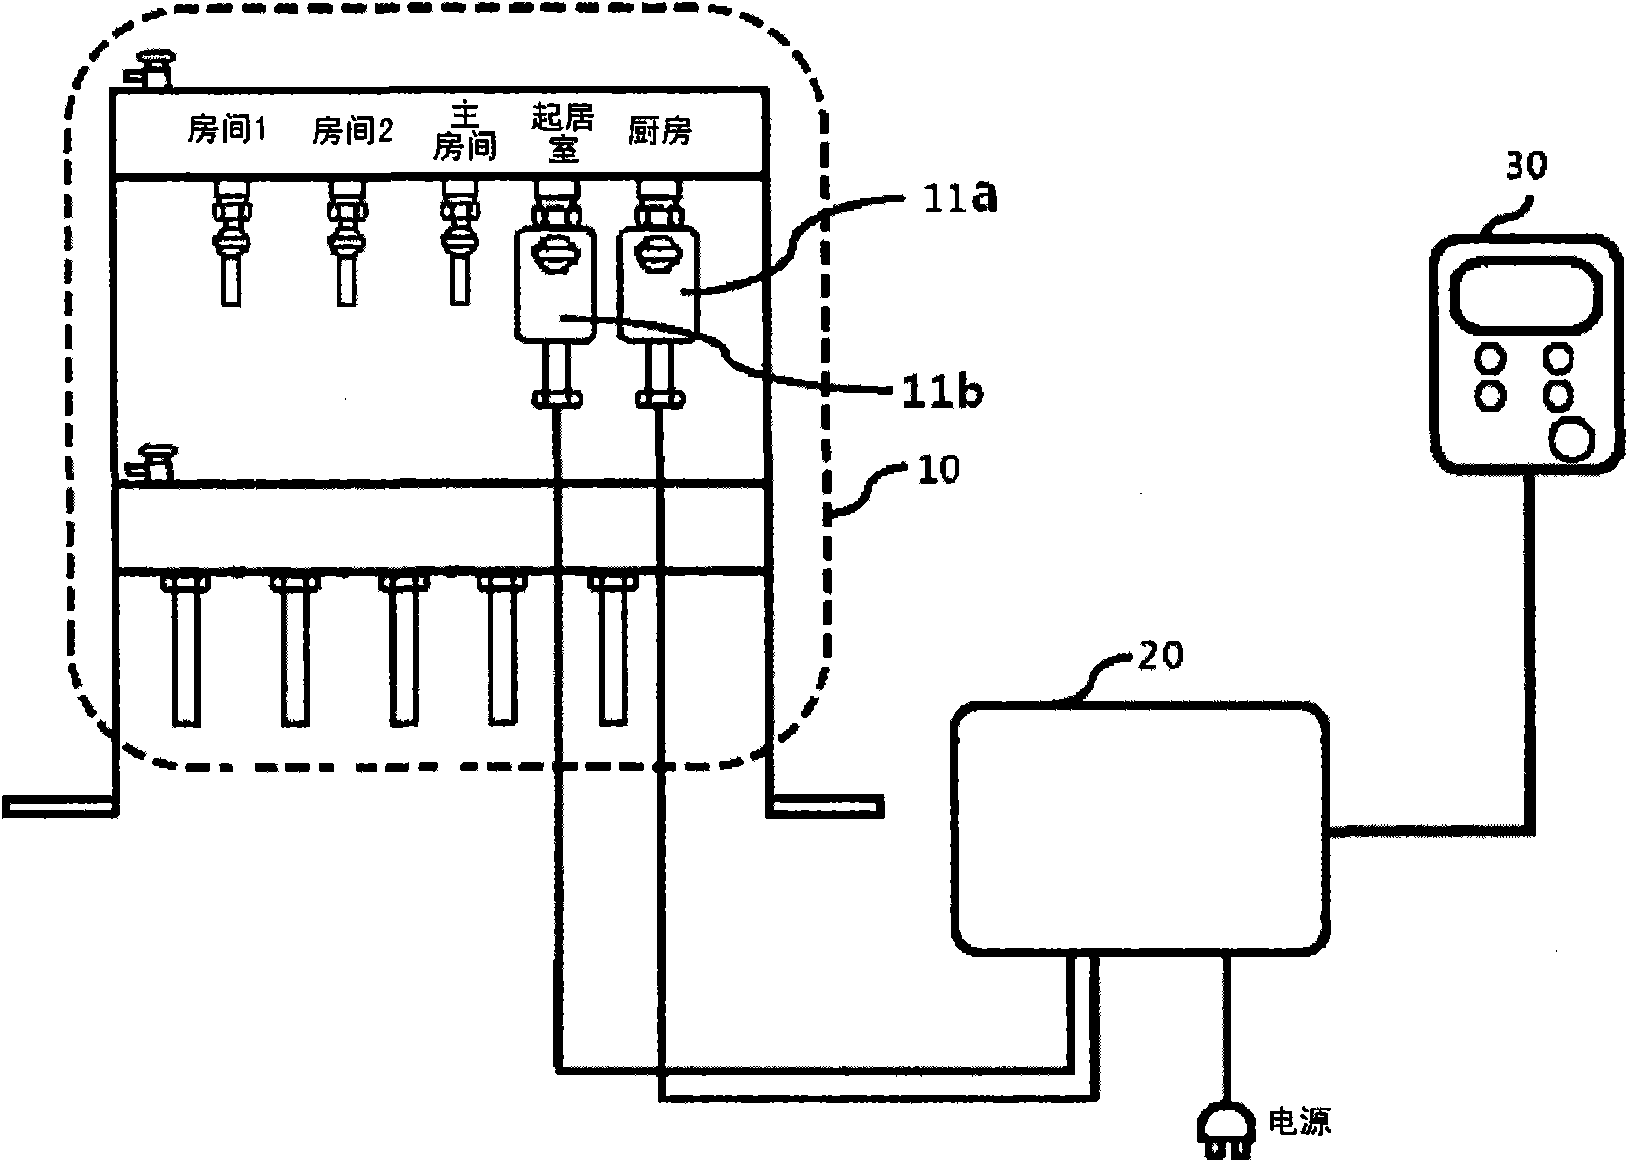 The heating control system and method for saving energy